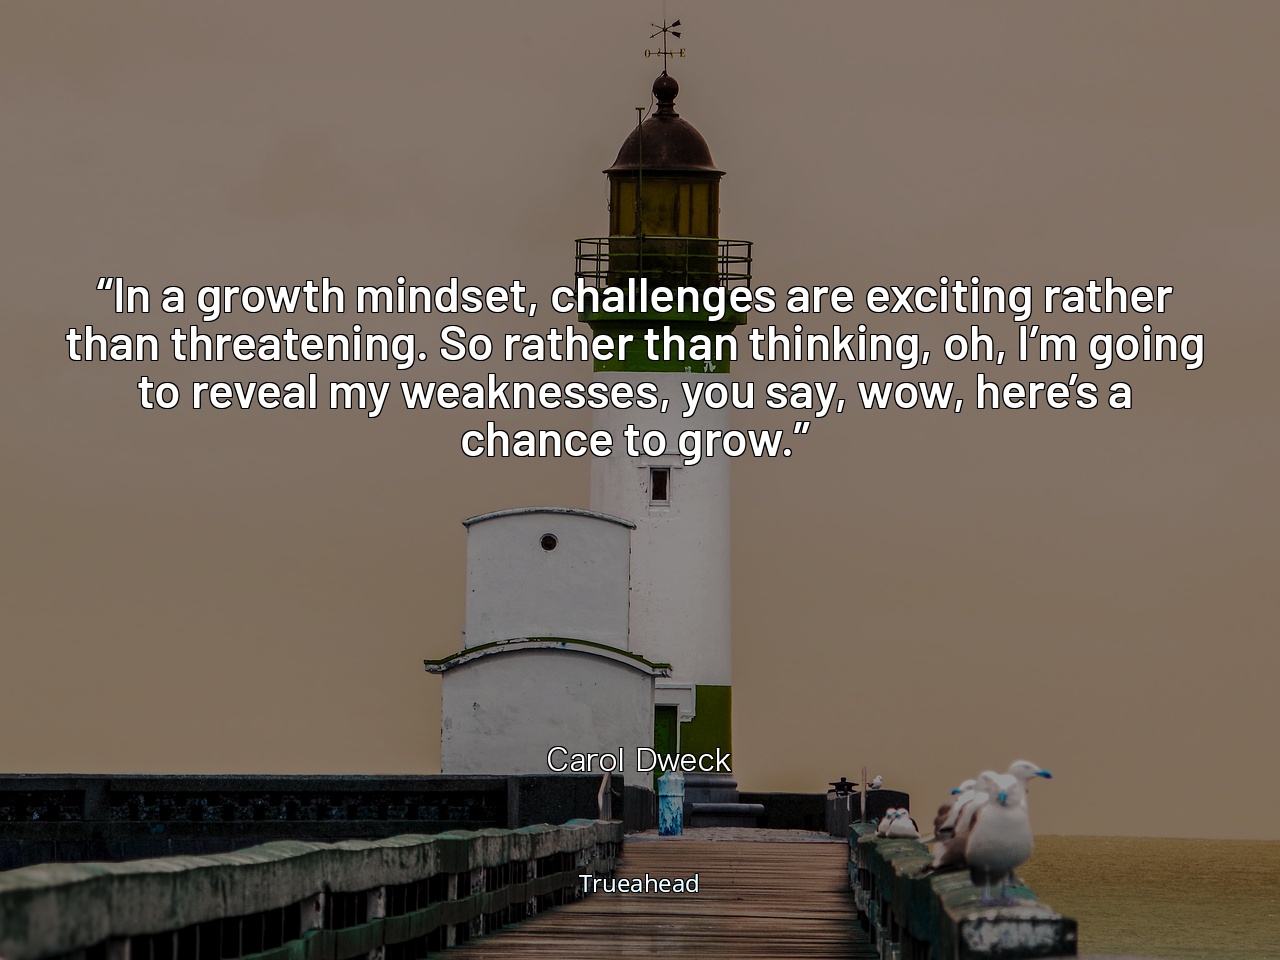 Embracing Growth Mindset: Transforming Challenges into Opportunities for Personal Development by Carol Dweck